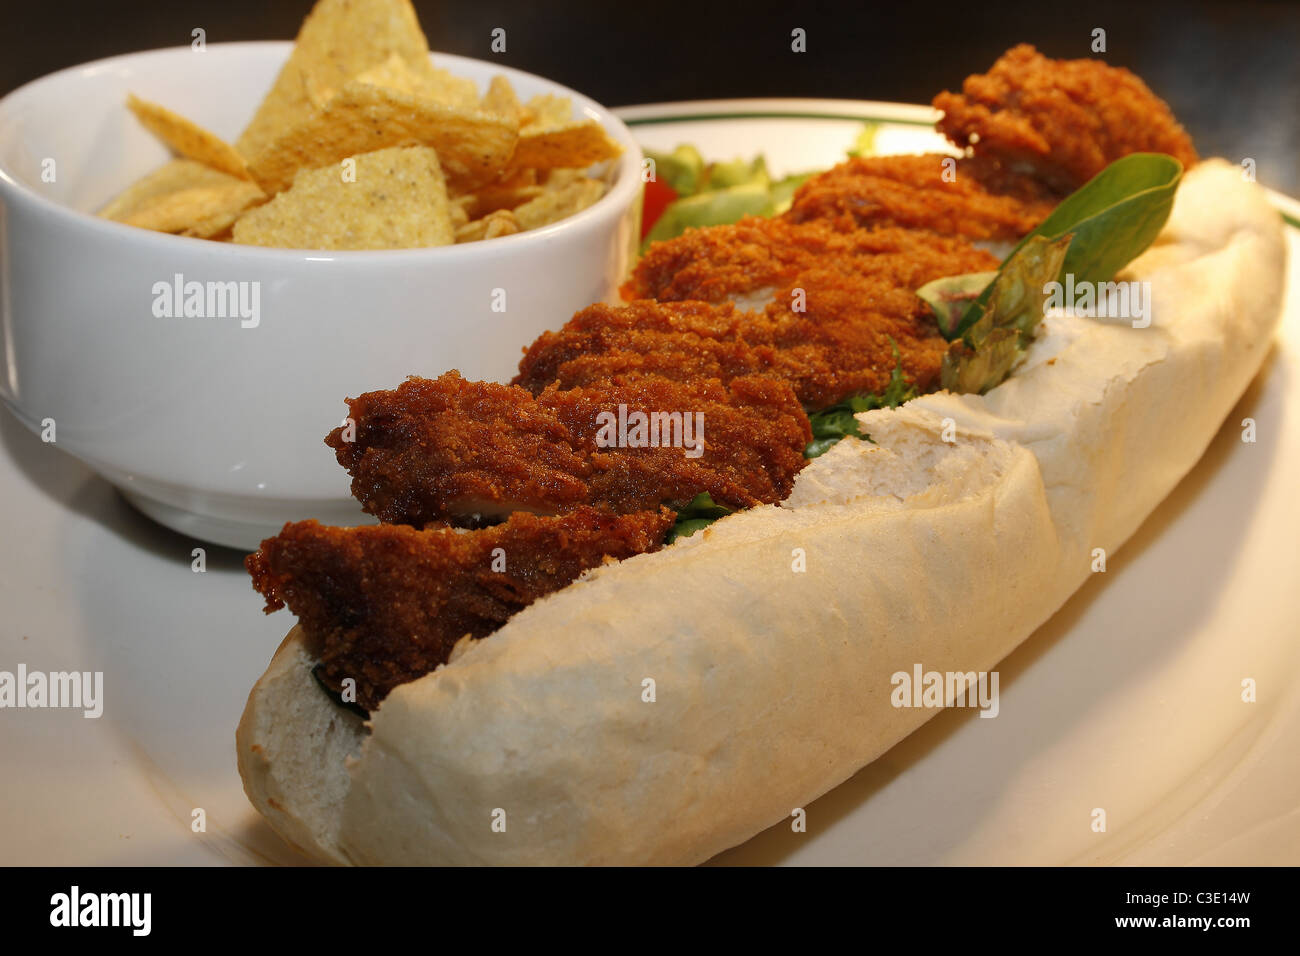 southern fried chicken baguette with tortilla chips Stock Photo